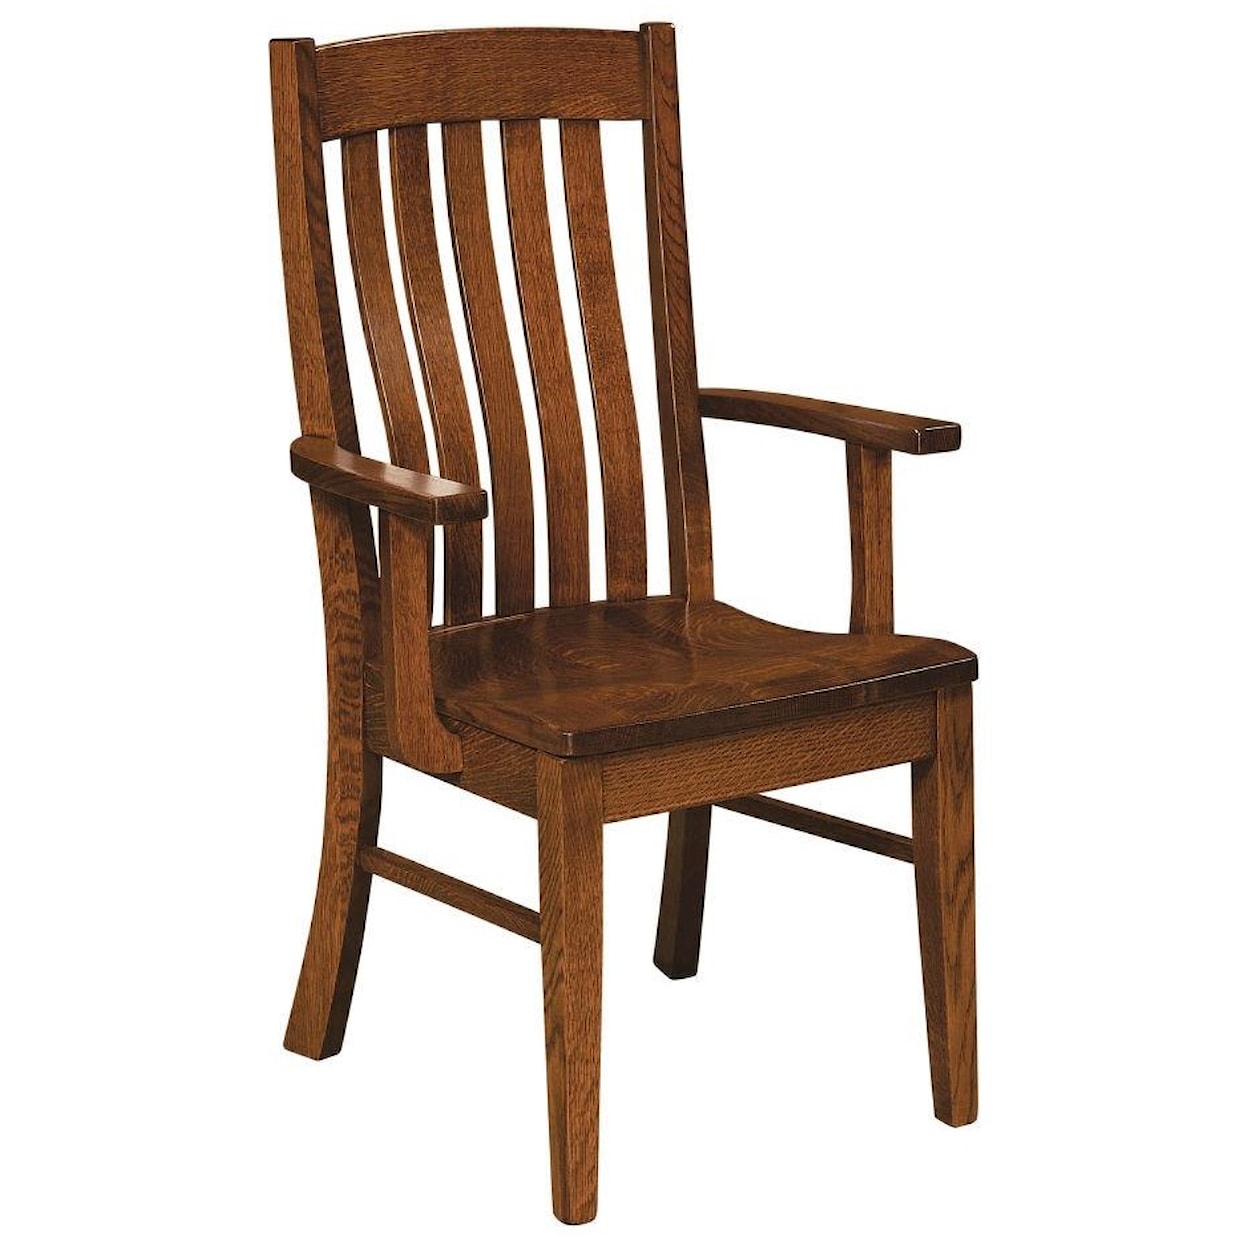 F&N Woodworking Houghton Arm Chair